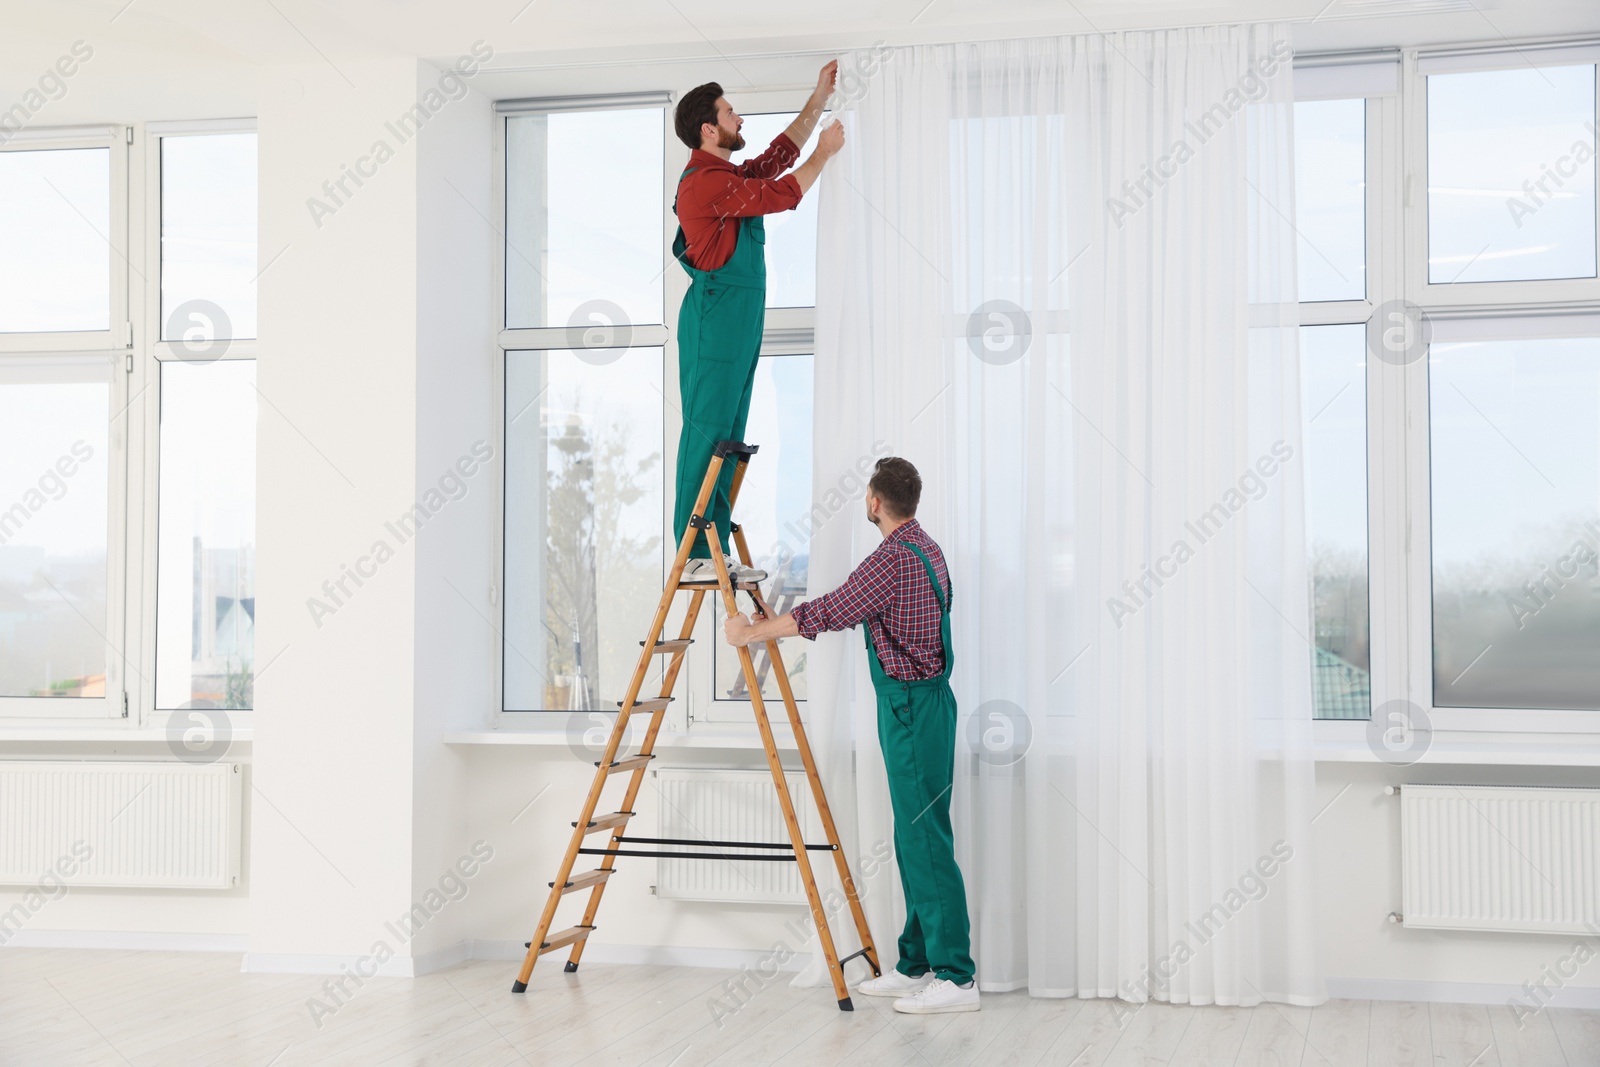 Photo of Workers in uniform hanging window curtain indoors